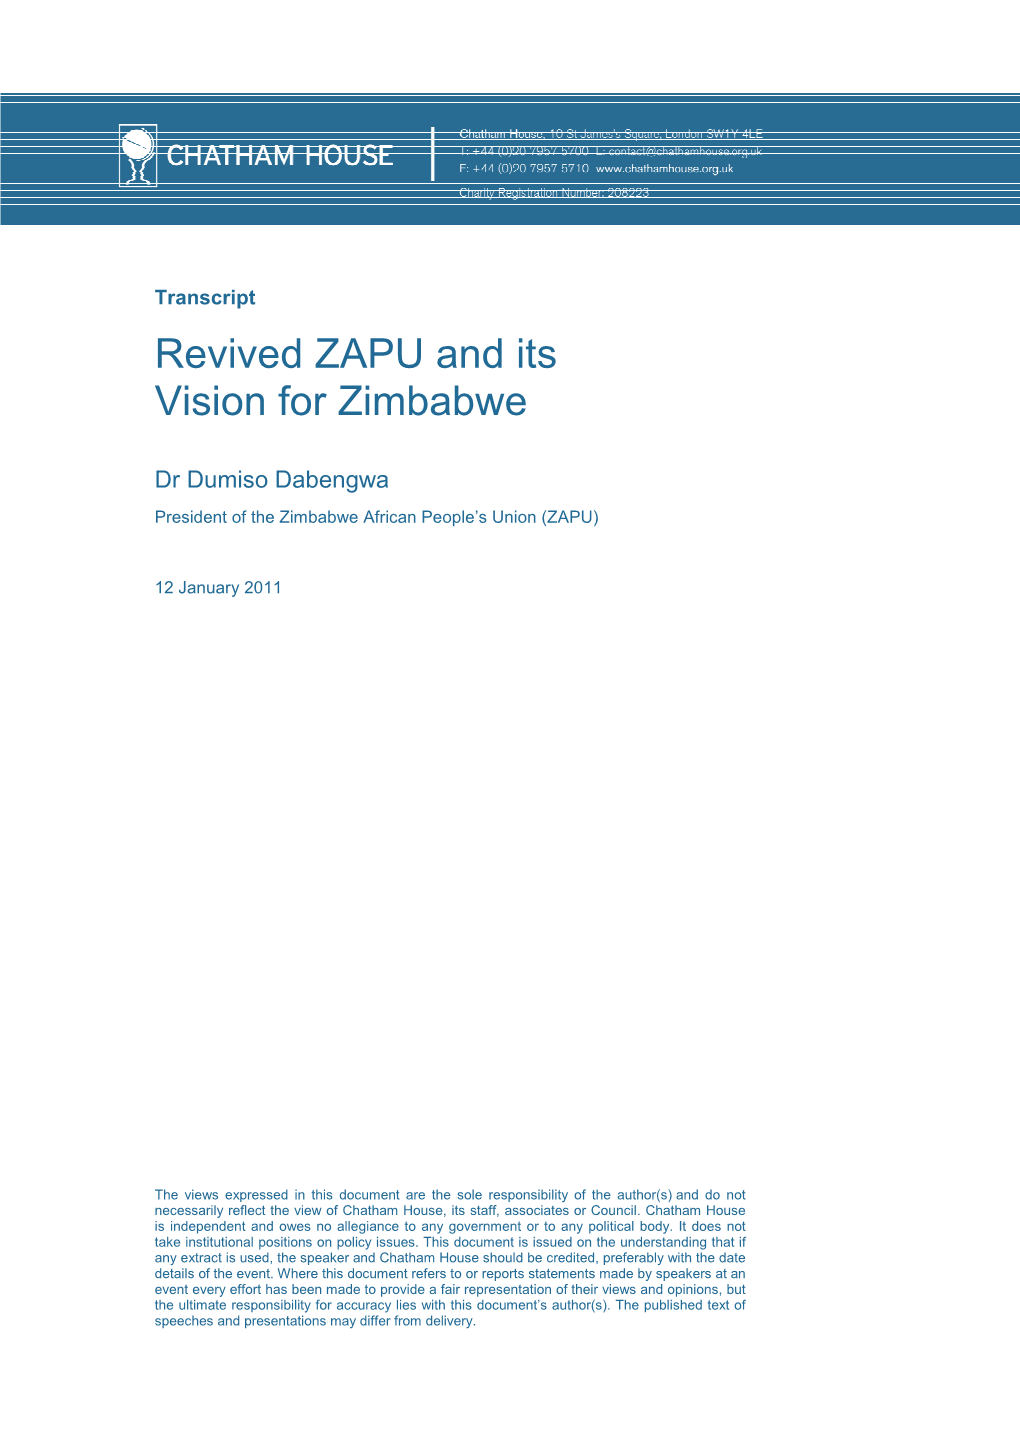 Revived ZAPU and Its Vision for Zimbabwe